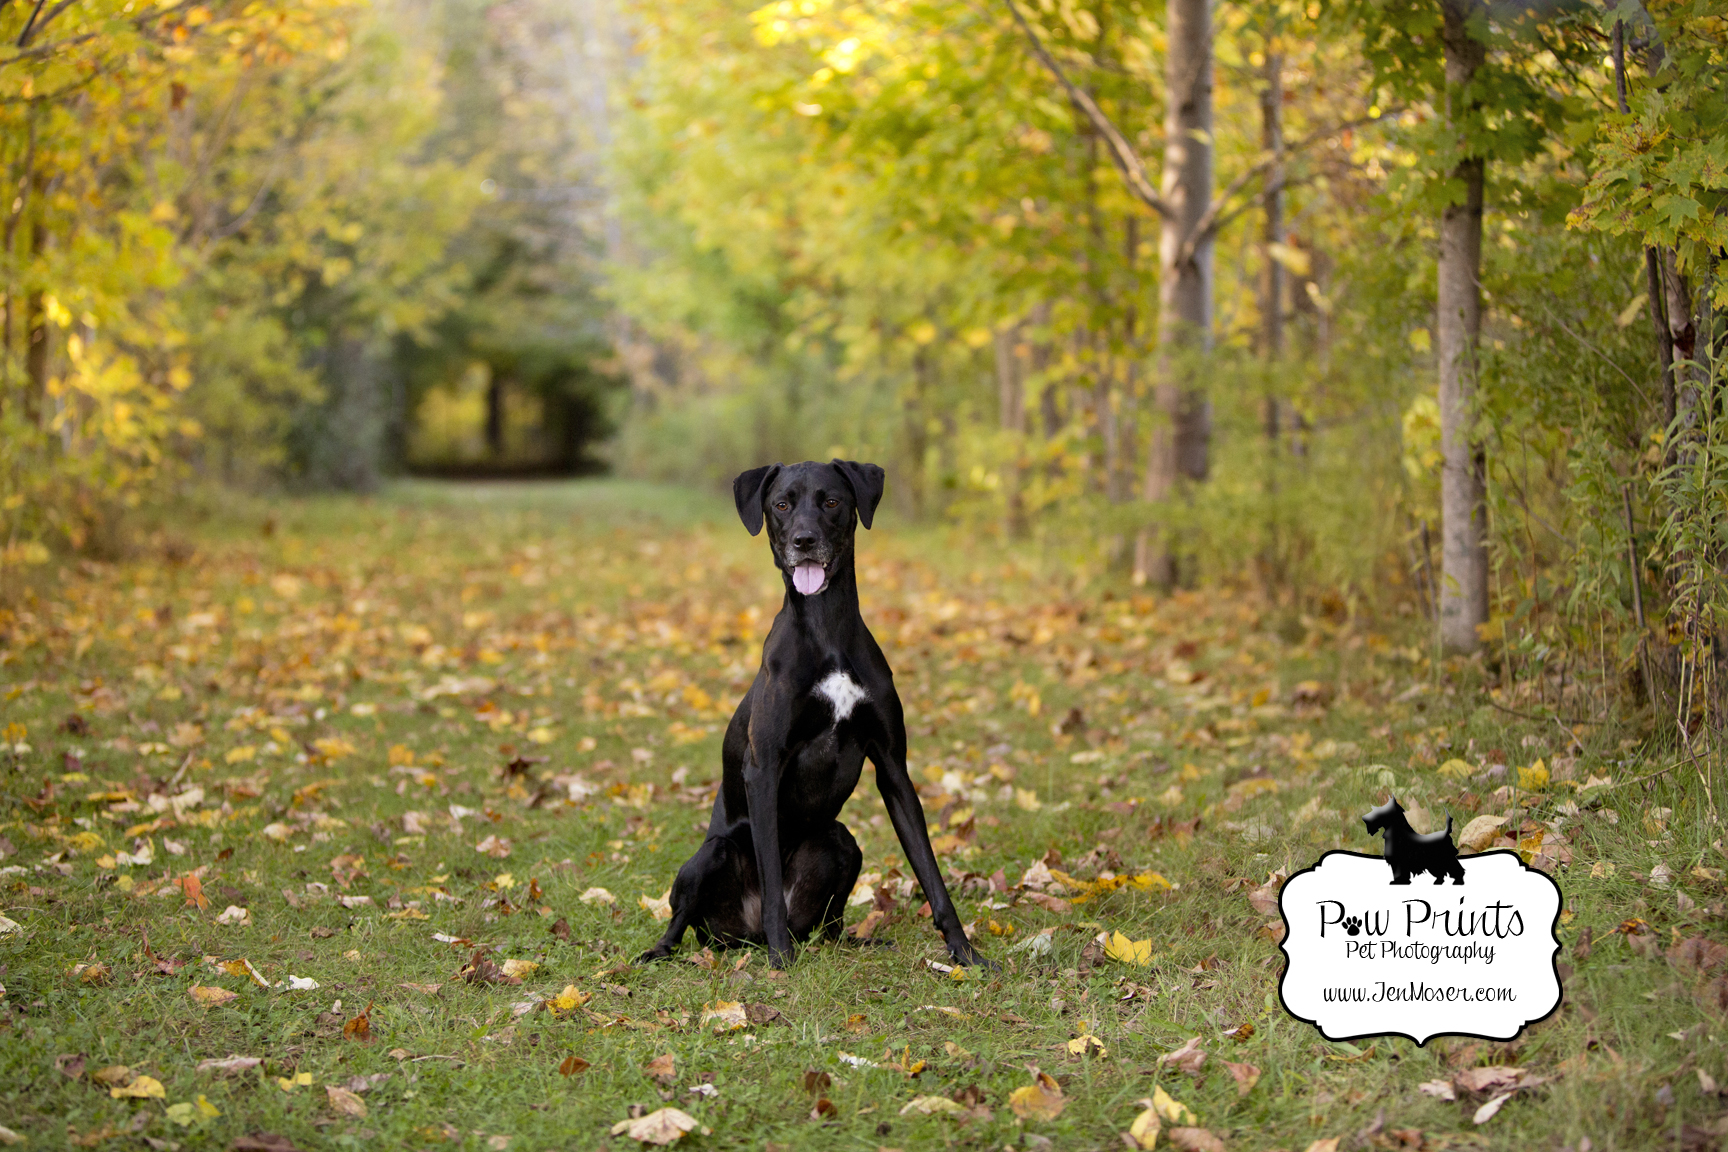 Indiana Pet Photographer_Paw Prints Pet Photography_Jen Moser_Pet Photography_Fort Wayne Pet Photographer_Metea Park Fort Wayne Indiana_black lab_fall leaves